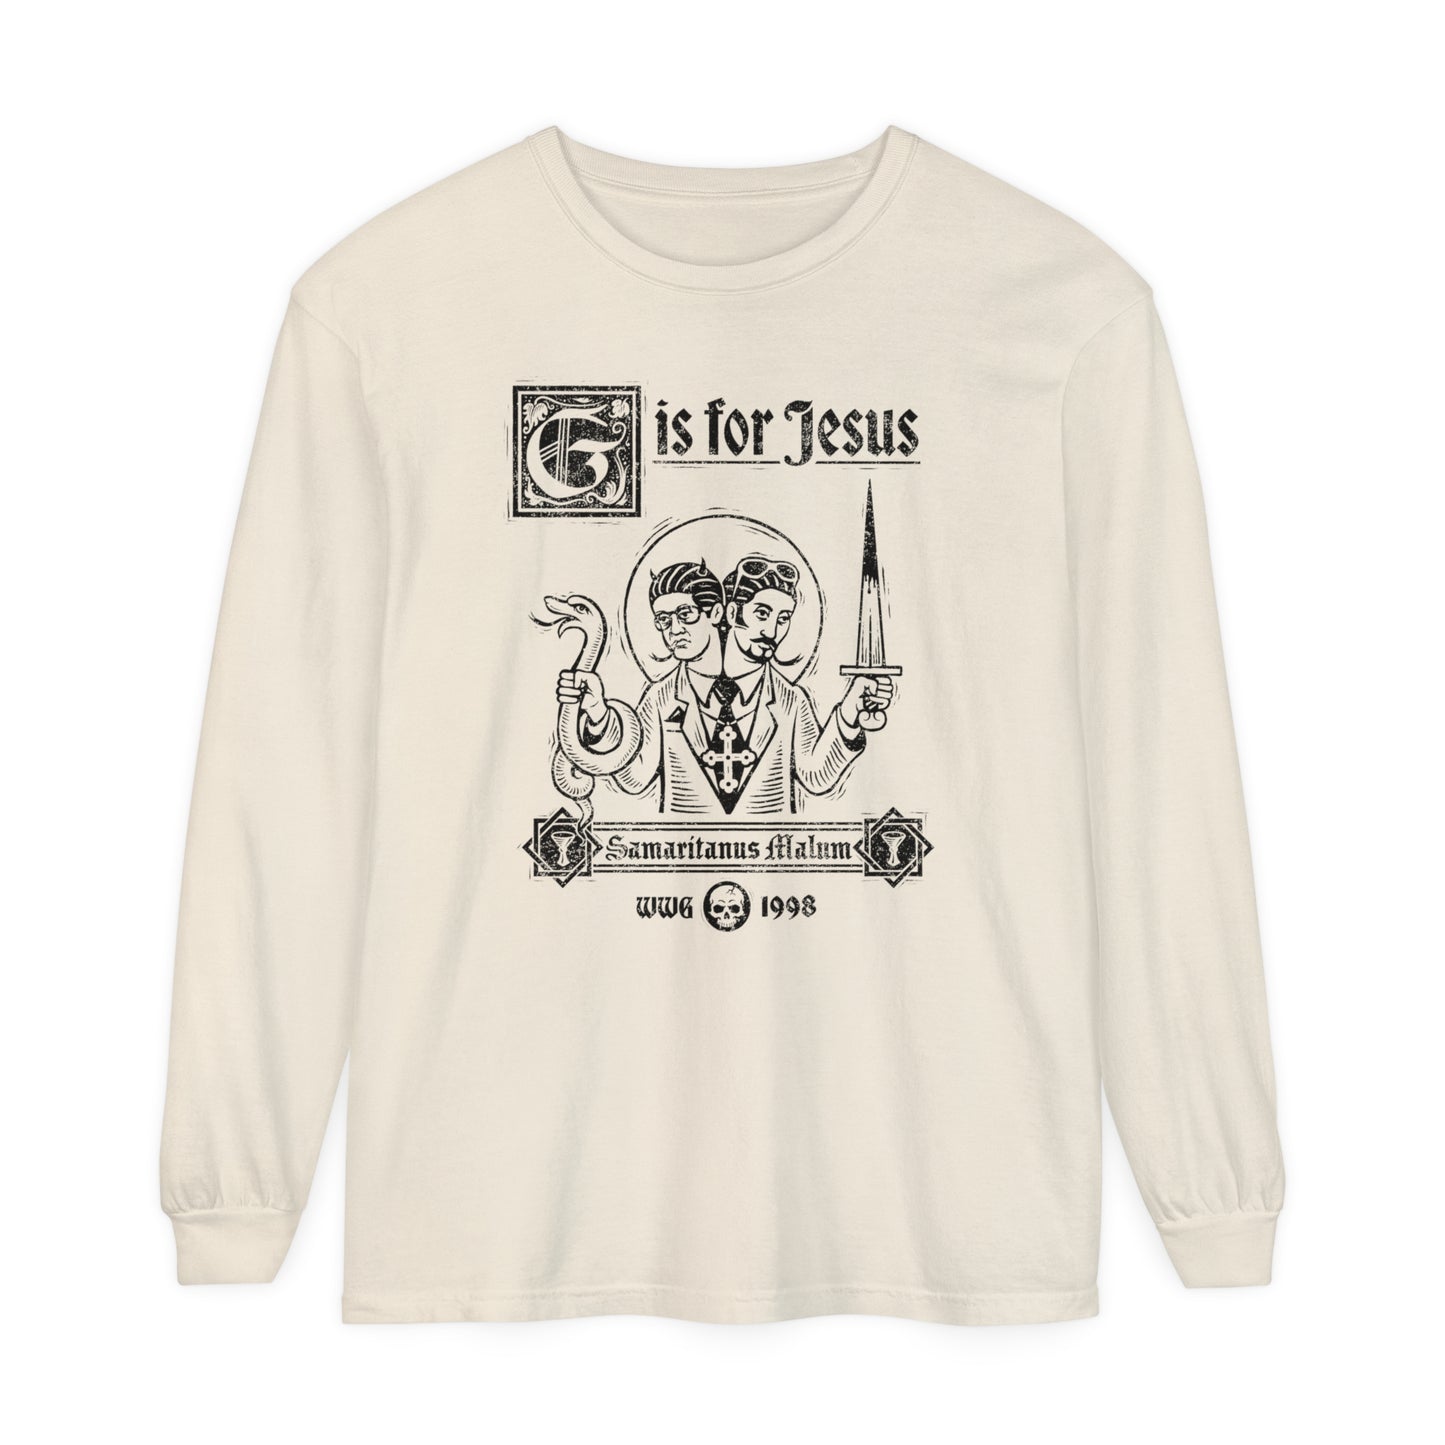 G is for Jesus Long Sleeve T-Shirt